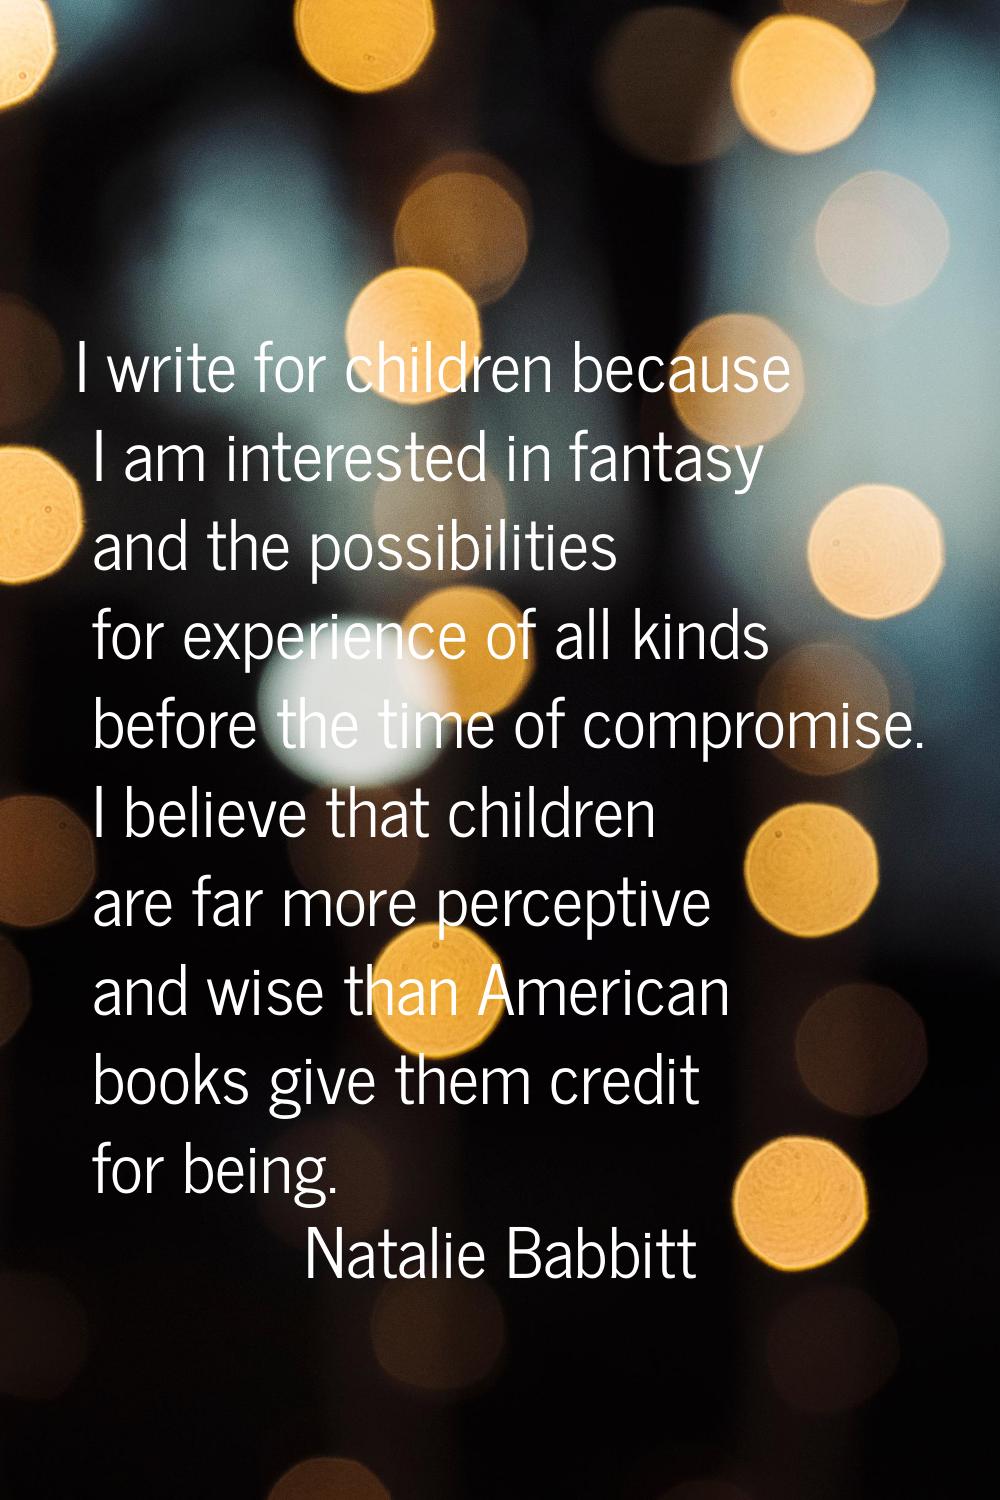 I write for children because I am interested in fantasy and the possibilities for experience of all